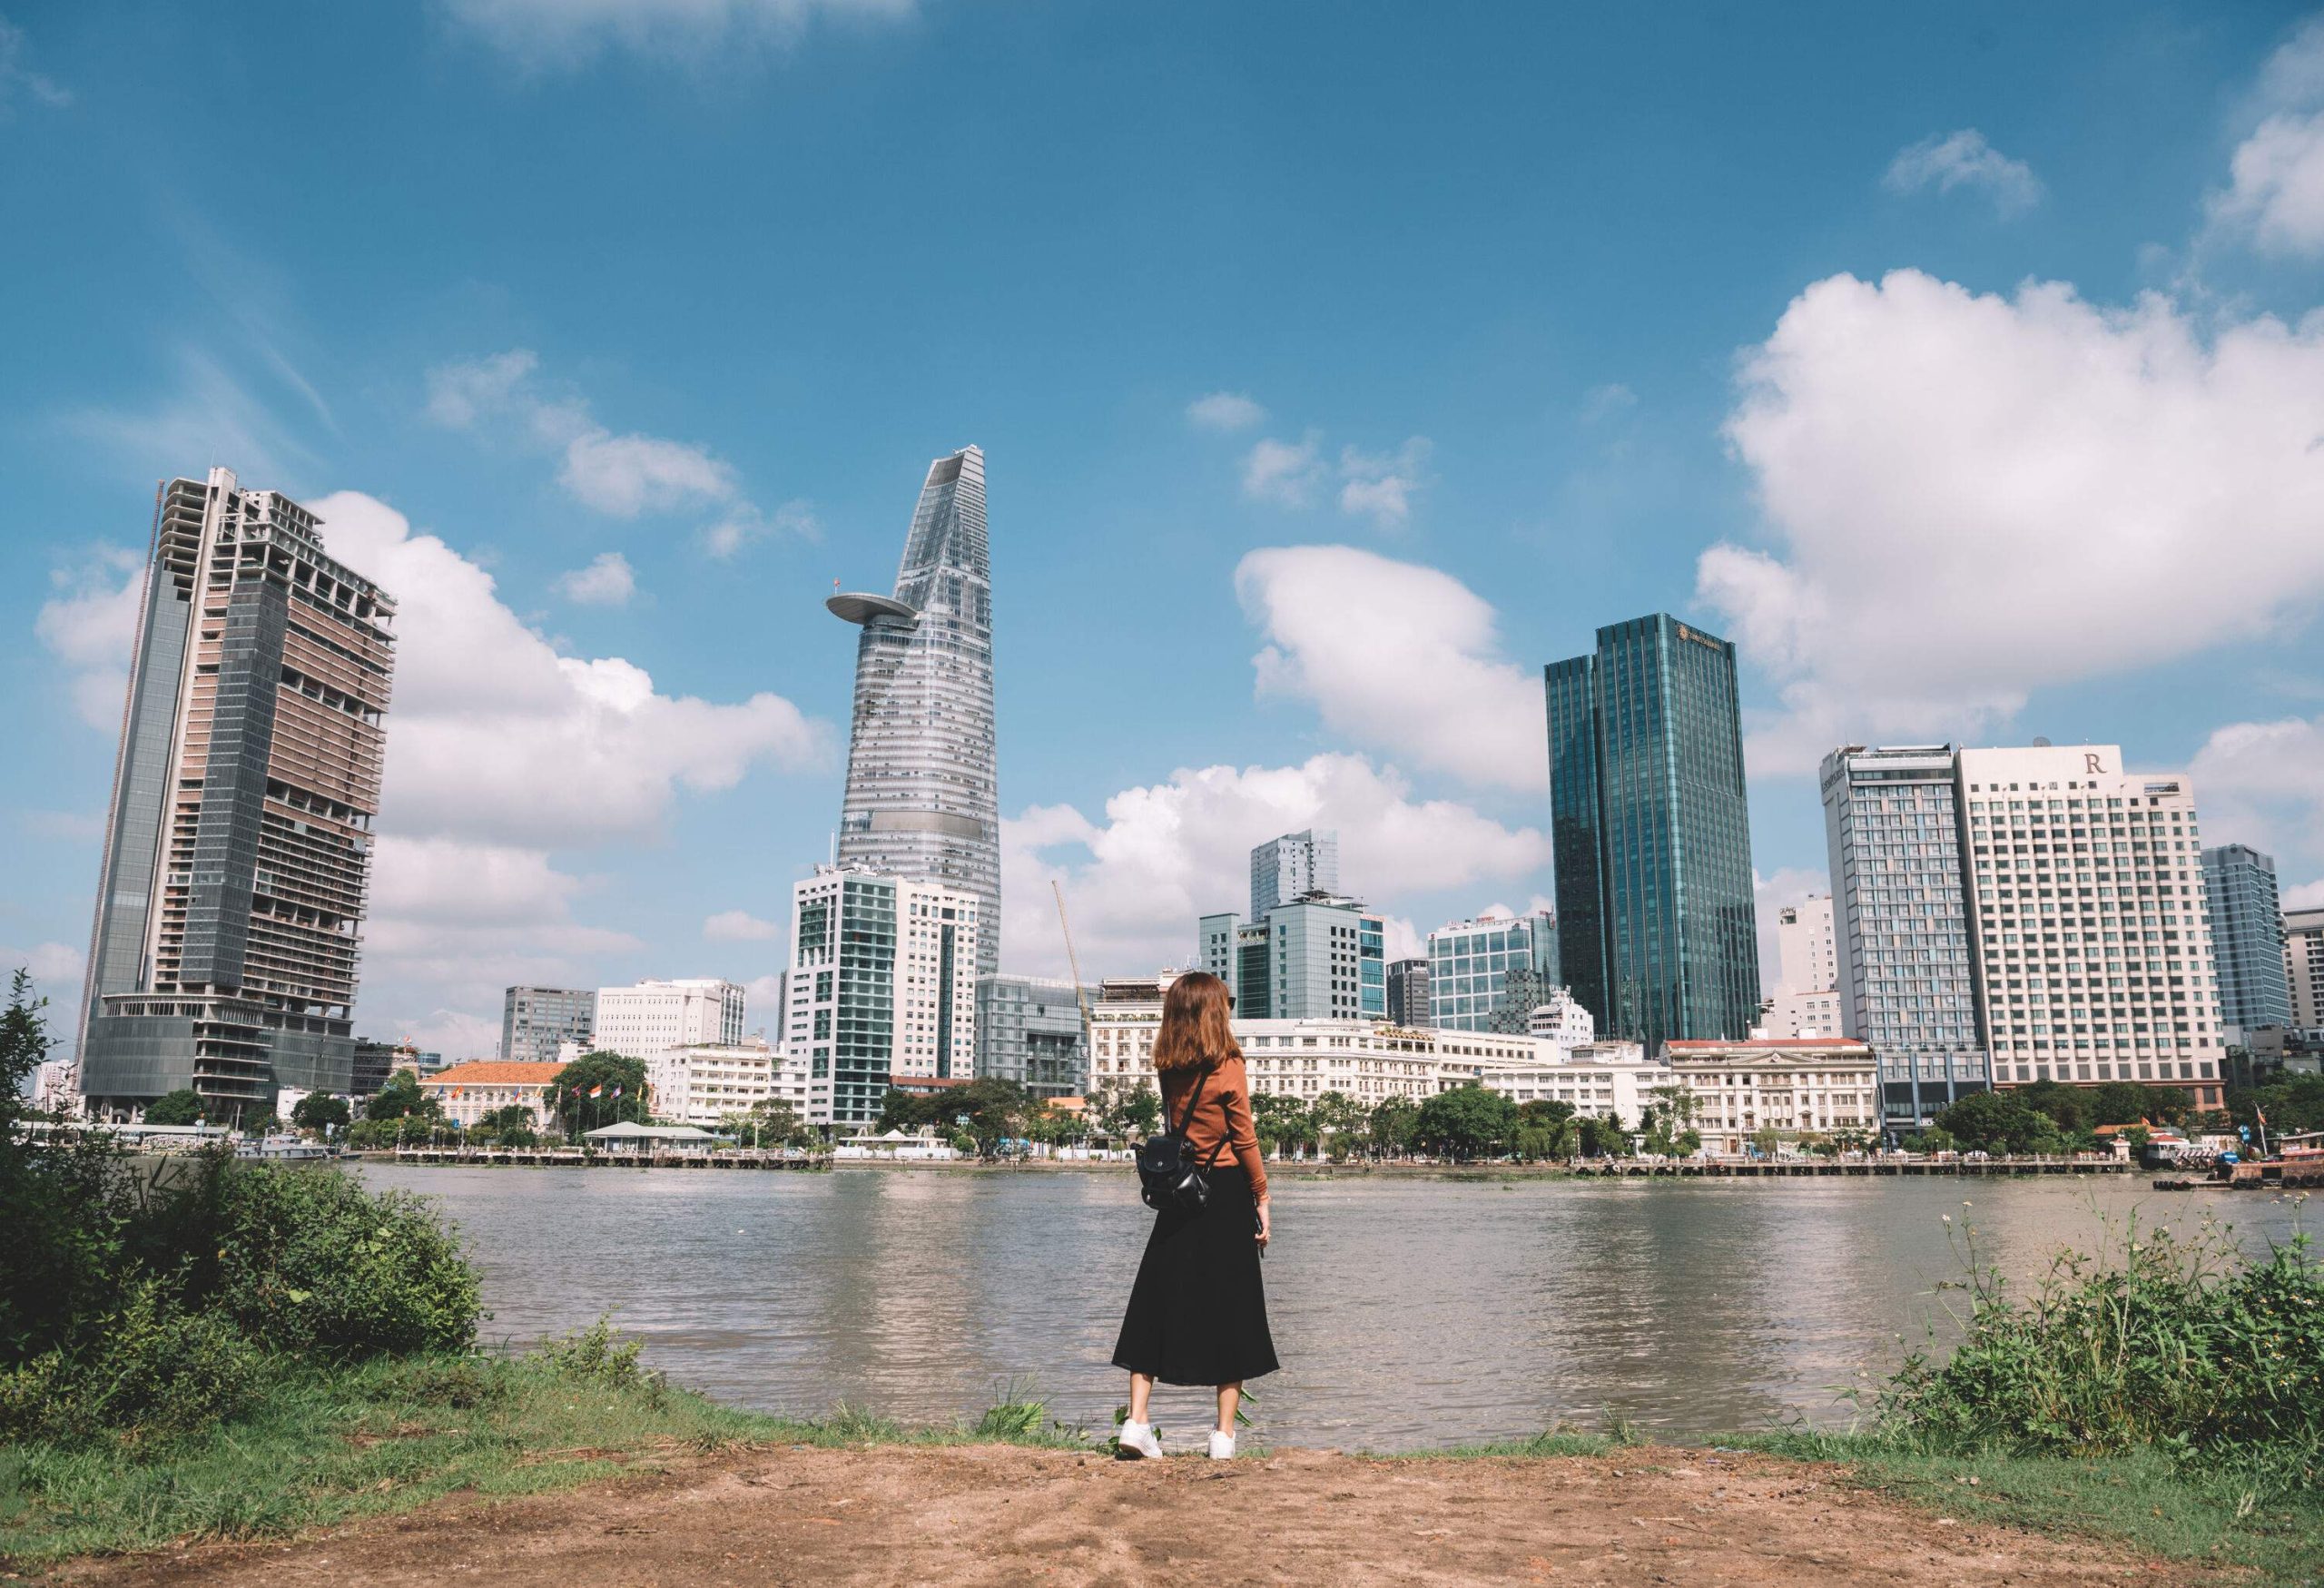 A woman in a brown sweater and black skirt stands on a riverbank against the backdrop of the city skyline.